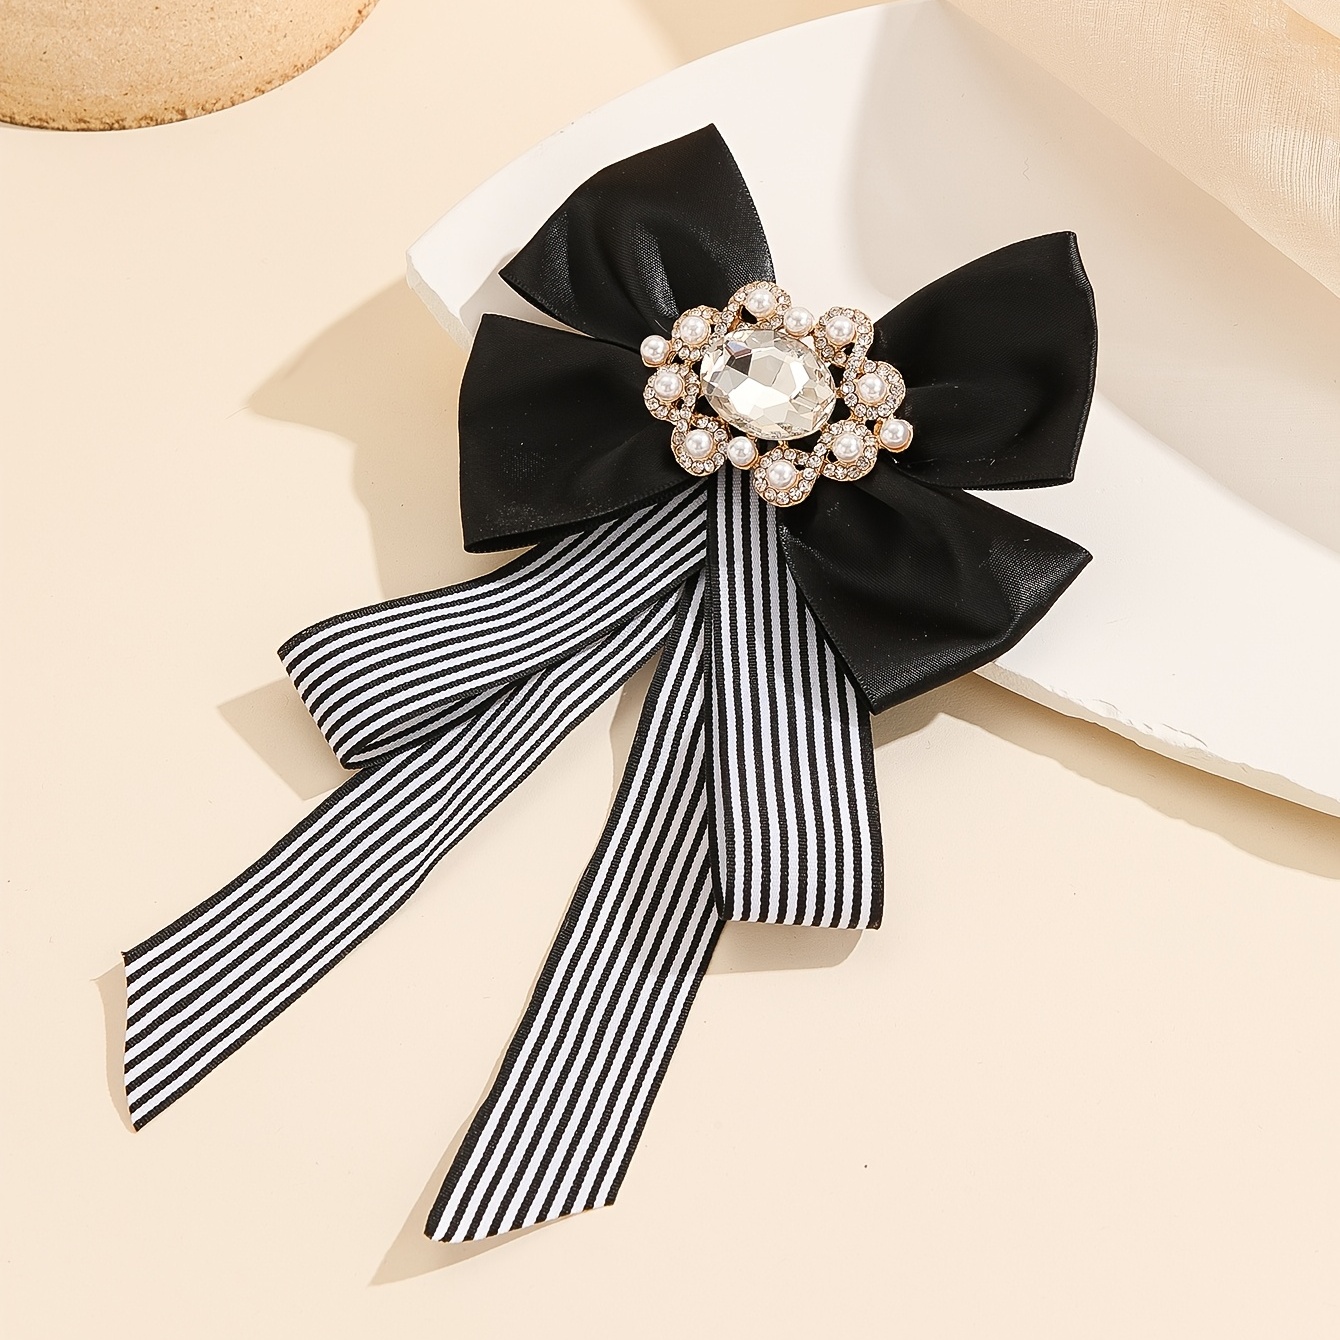 Black Bow Brooch Tie for Women With Insect. Gift for Her. 